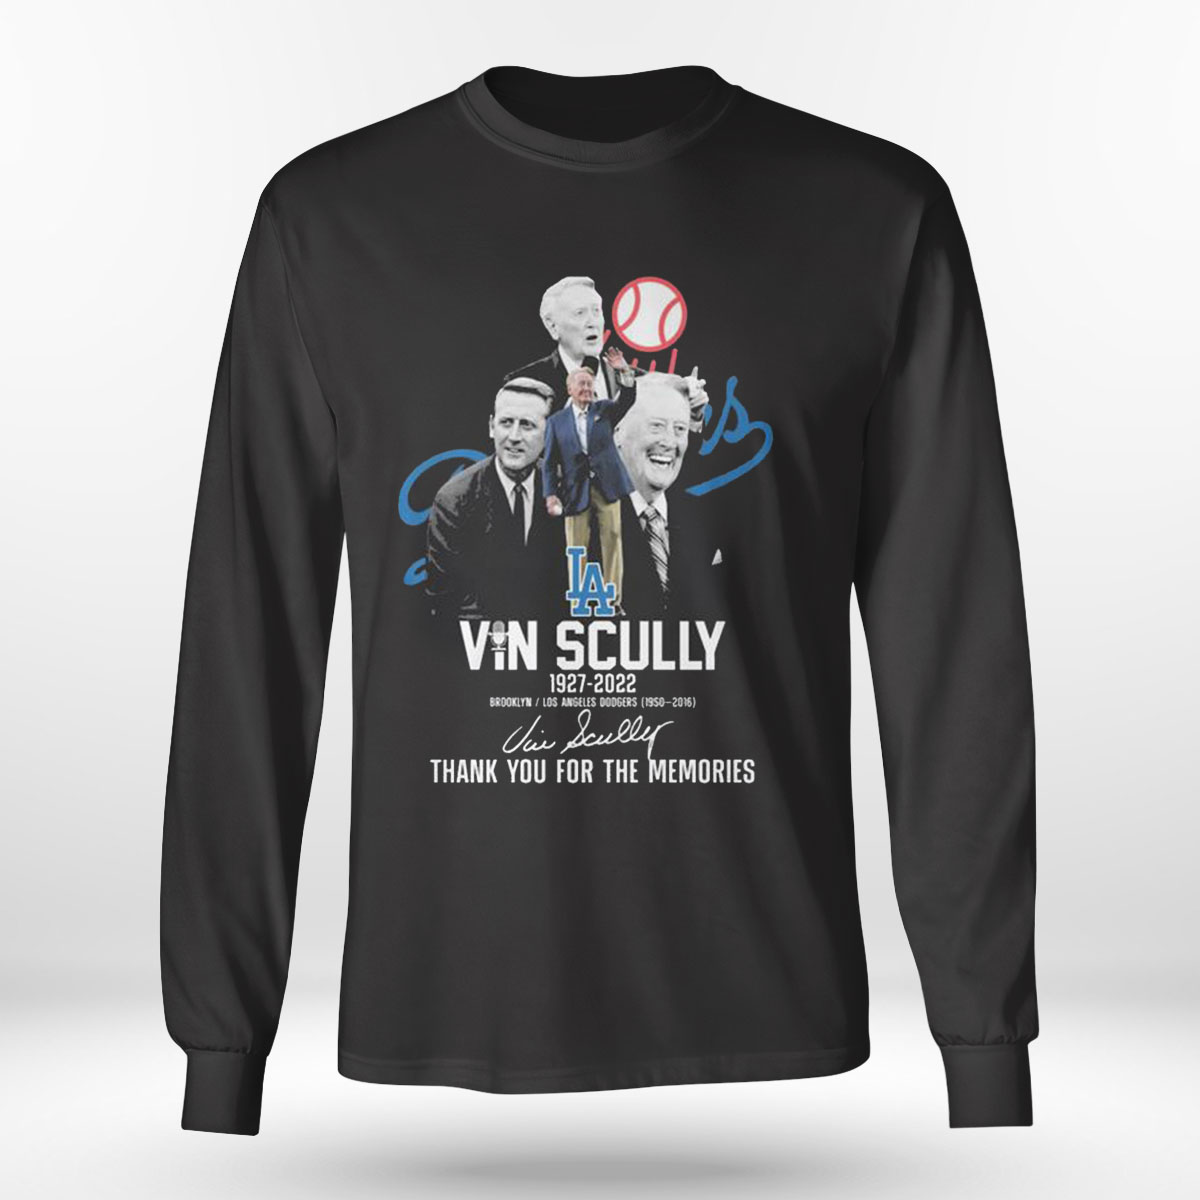 Vin Scully 1927-2022 Thank You For The Memories Unisex T Shirt